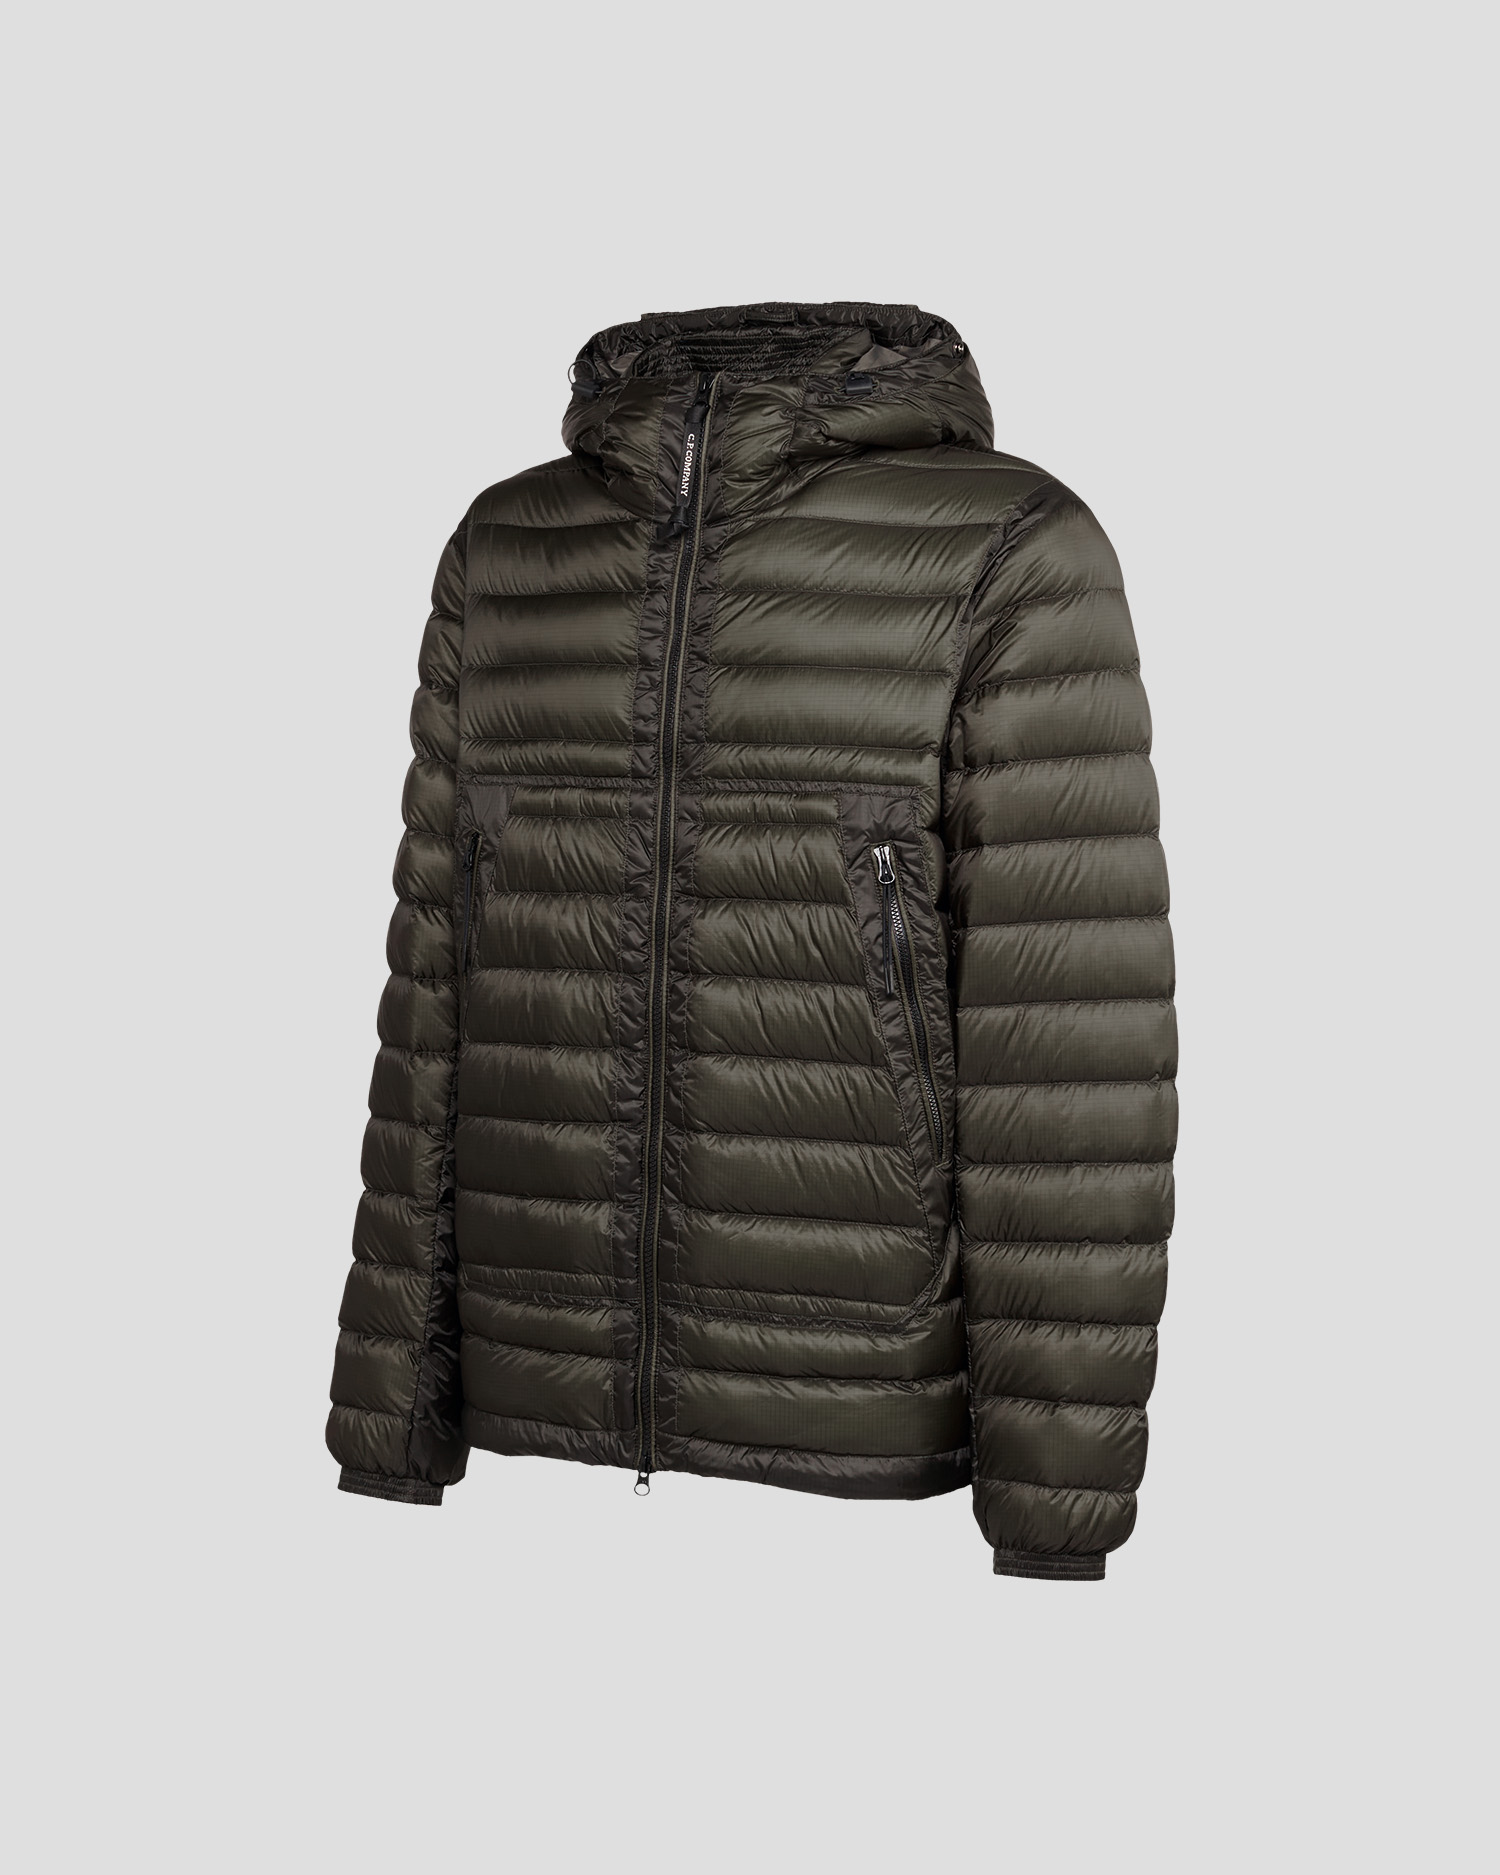 D.D. Shell Goggle Down Jacket   C.P. Company Online Store